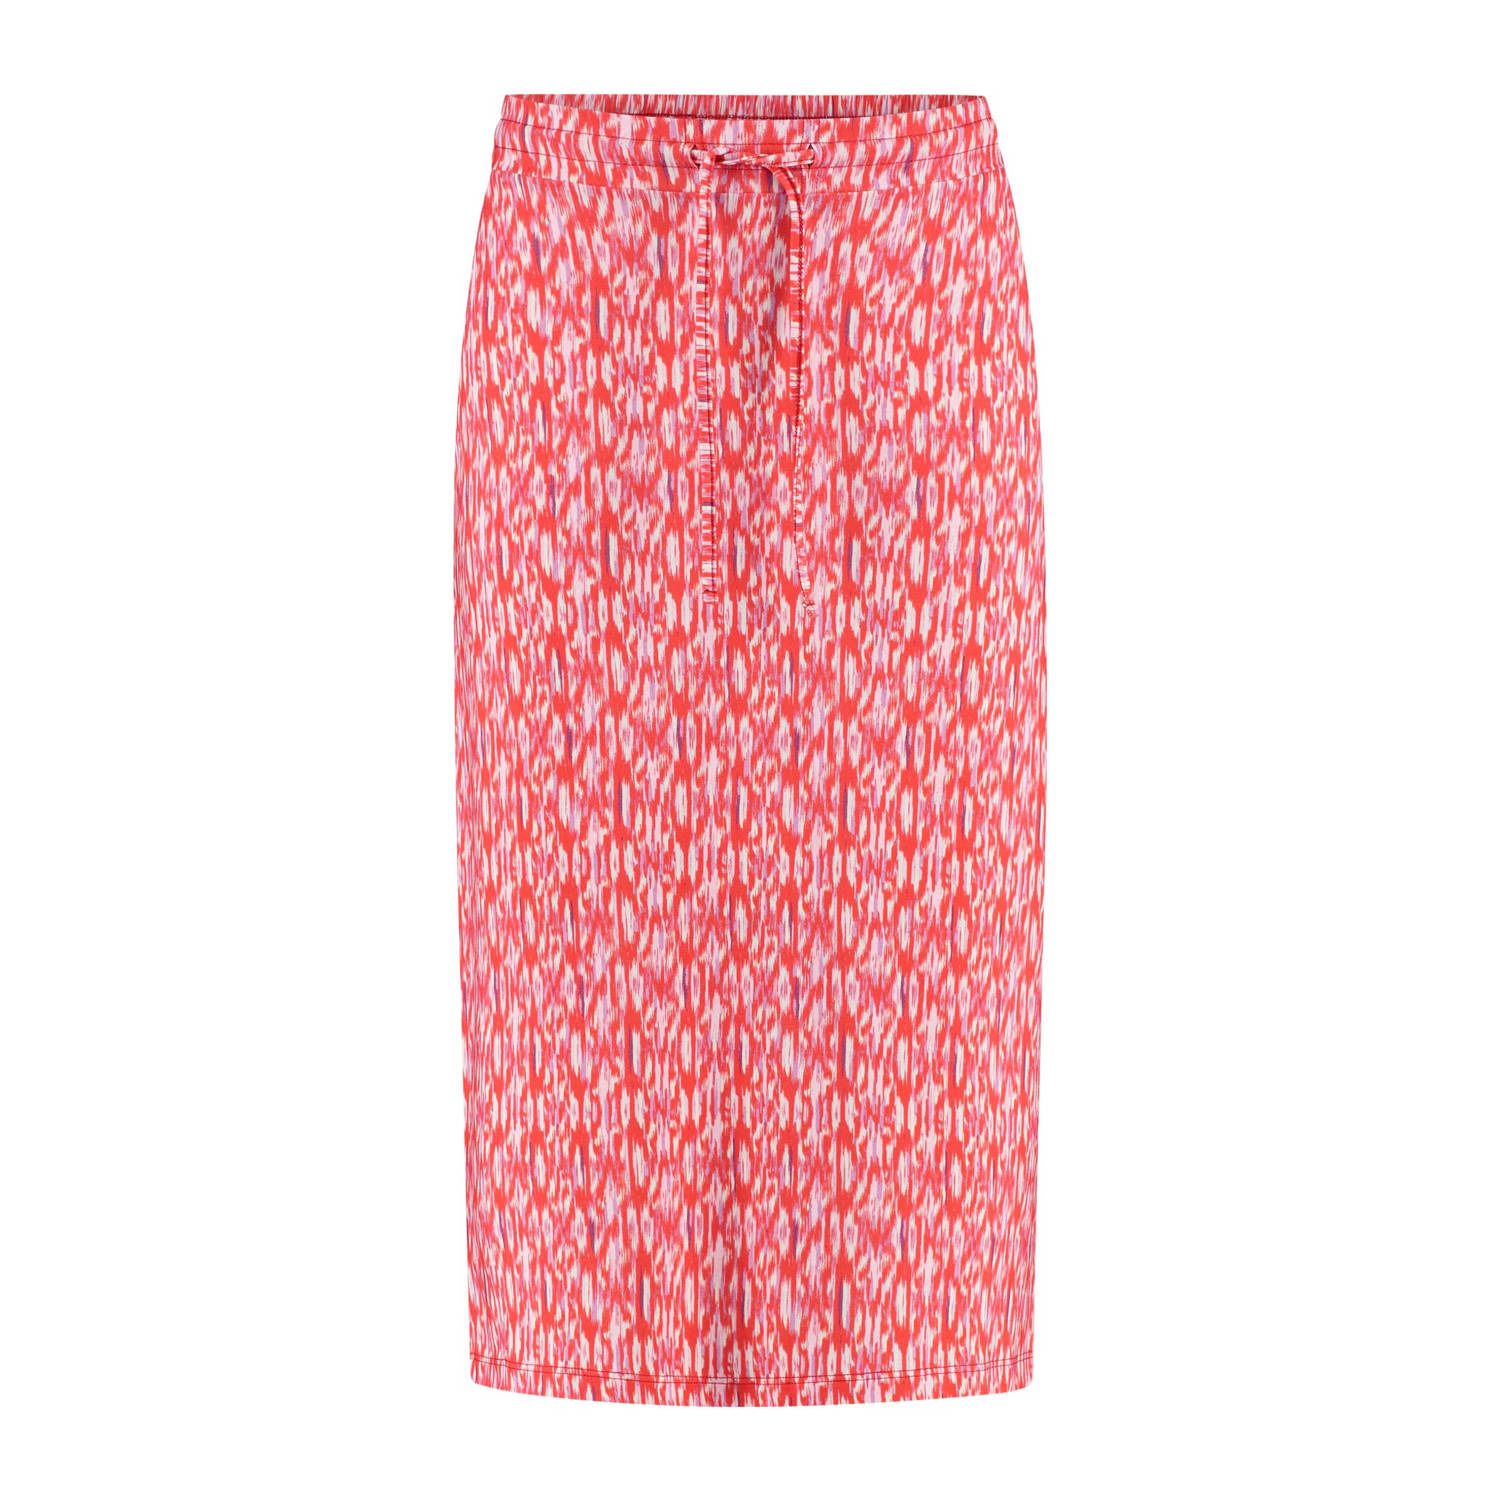 Expresso midi rok EX24-23052 met all over print rood wit